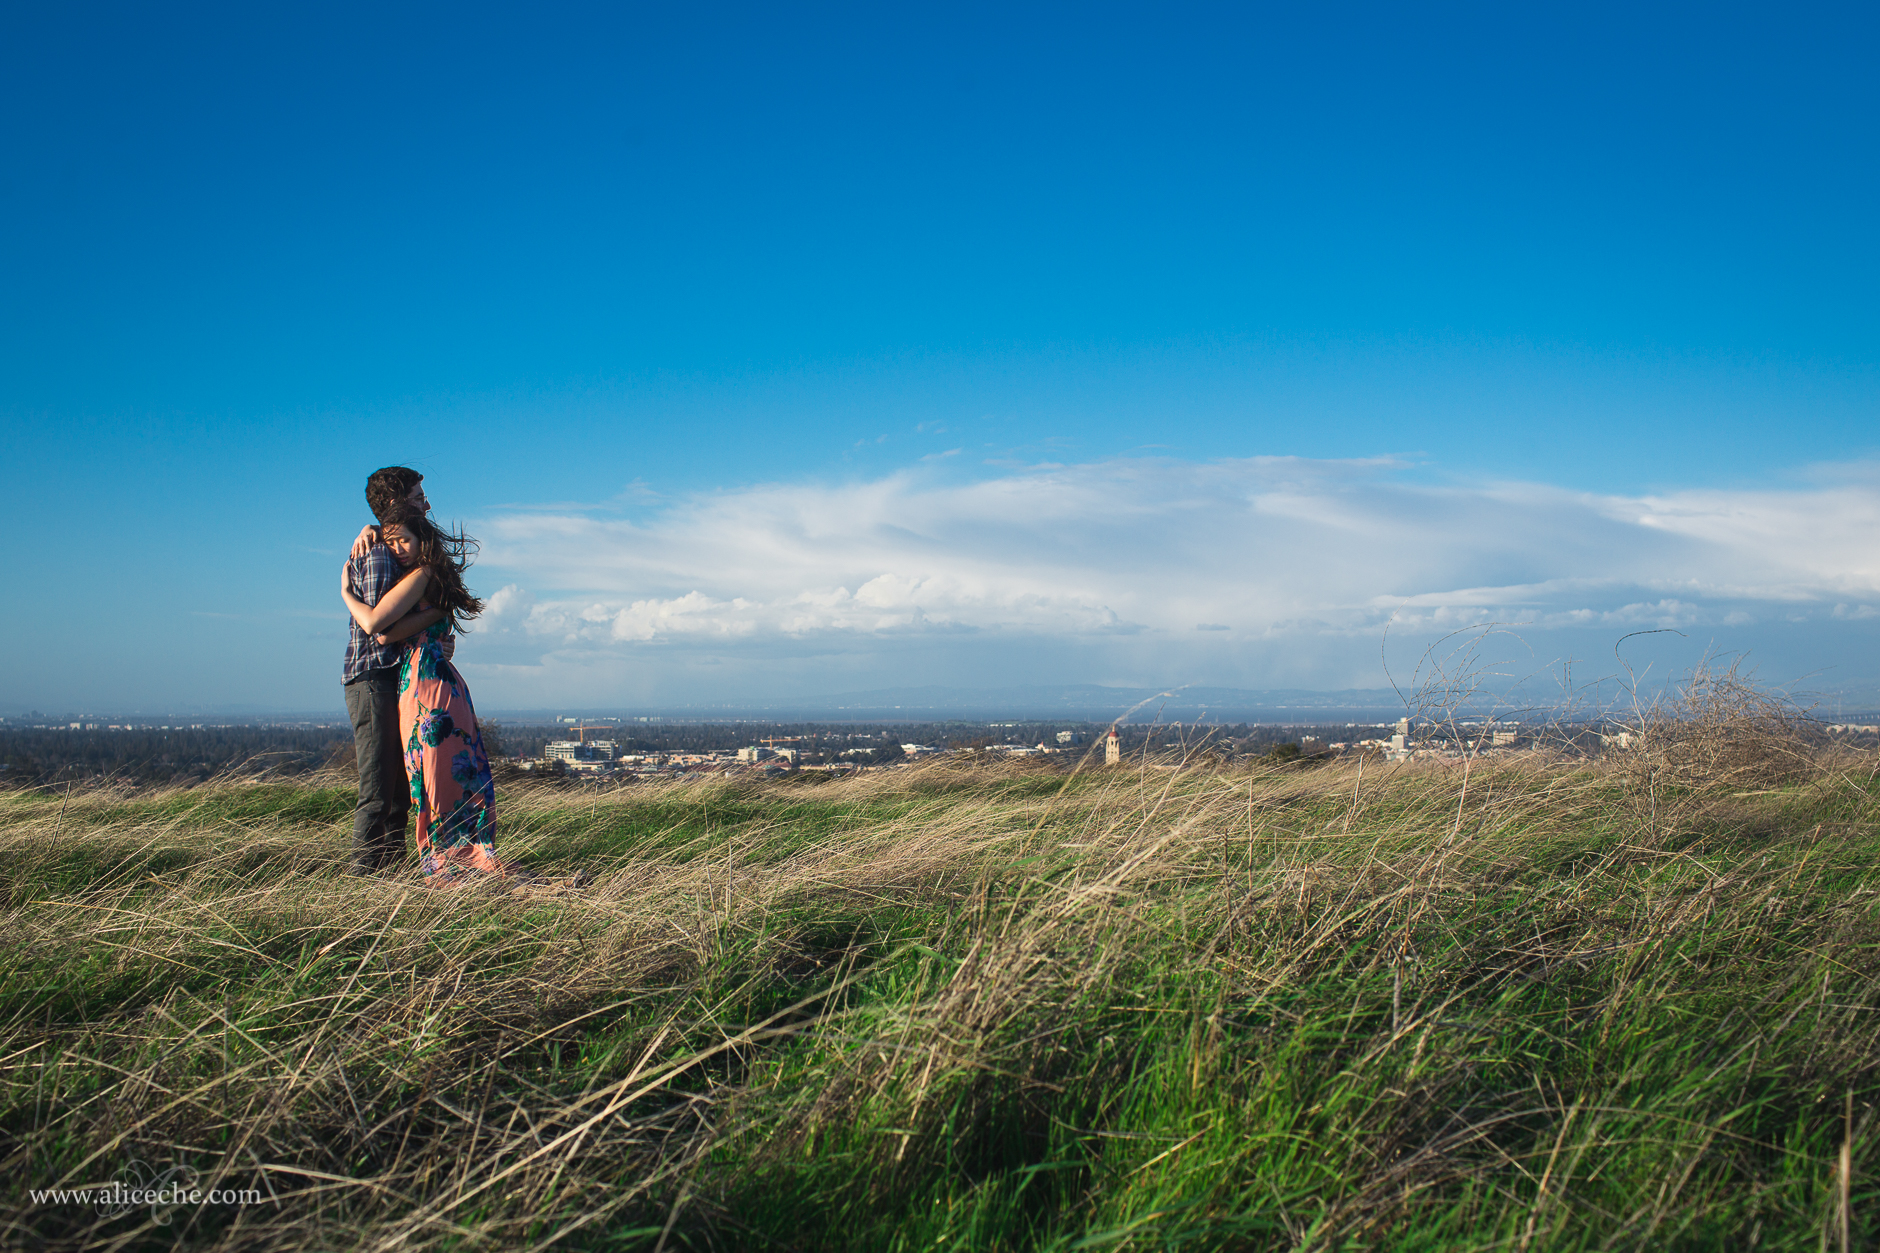 alice-che-photography-stanford-windswept-couple-hugging-blue-skies-green-grass